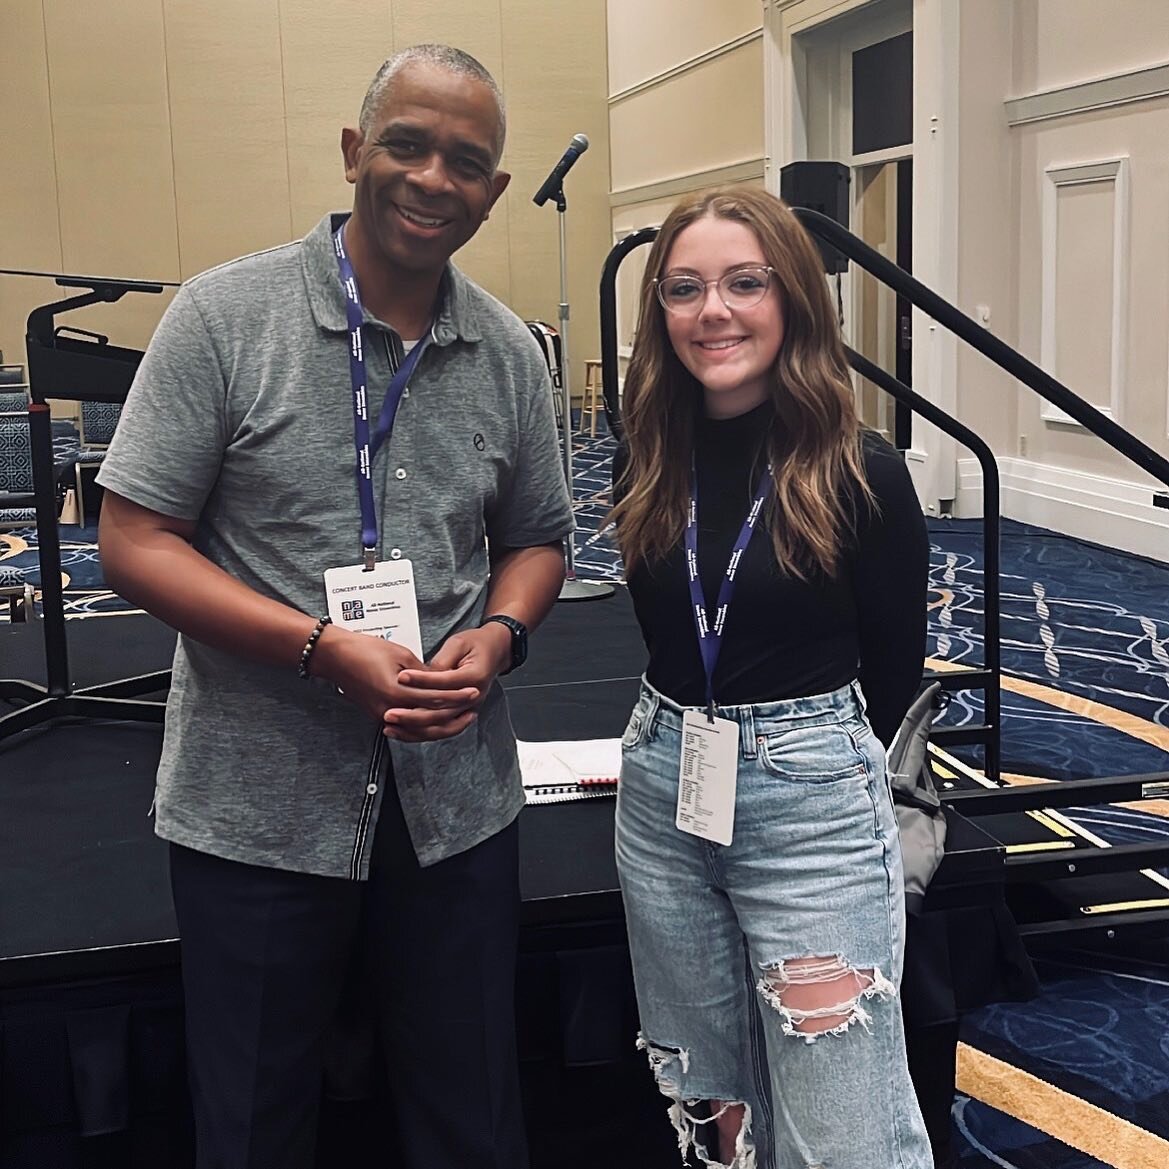 PROUD TEACHER! One of Dr. S&rsquo; high school students, Lauren, attended @nafme All-National Concert Honor Band in #washingtondc past weekend! Playing second clarinet with others from all around the country for esteemed conductor Rodney Dorsey, who 